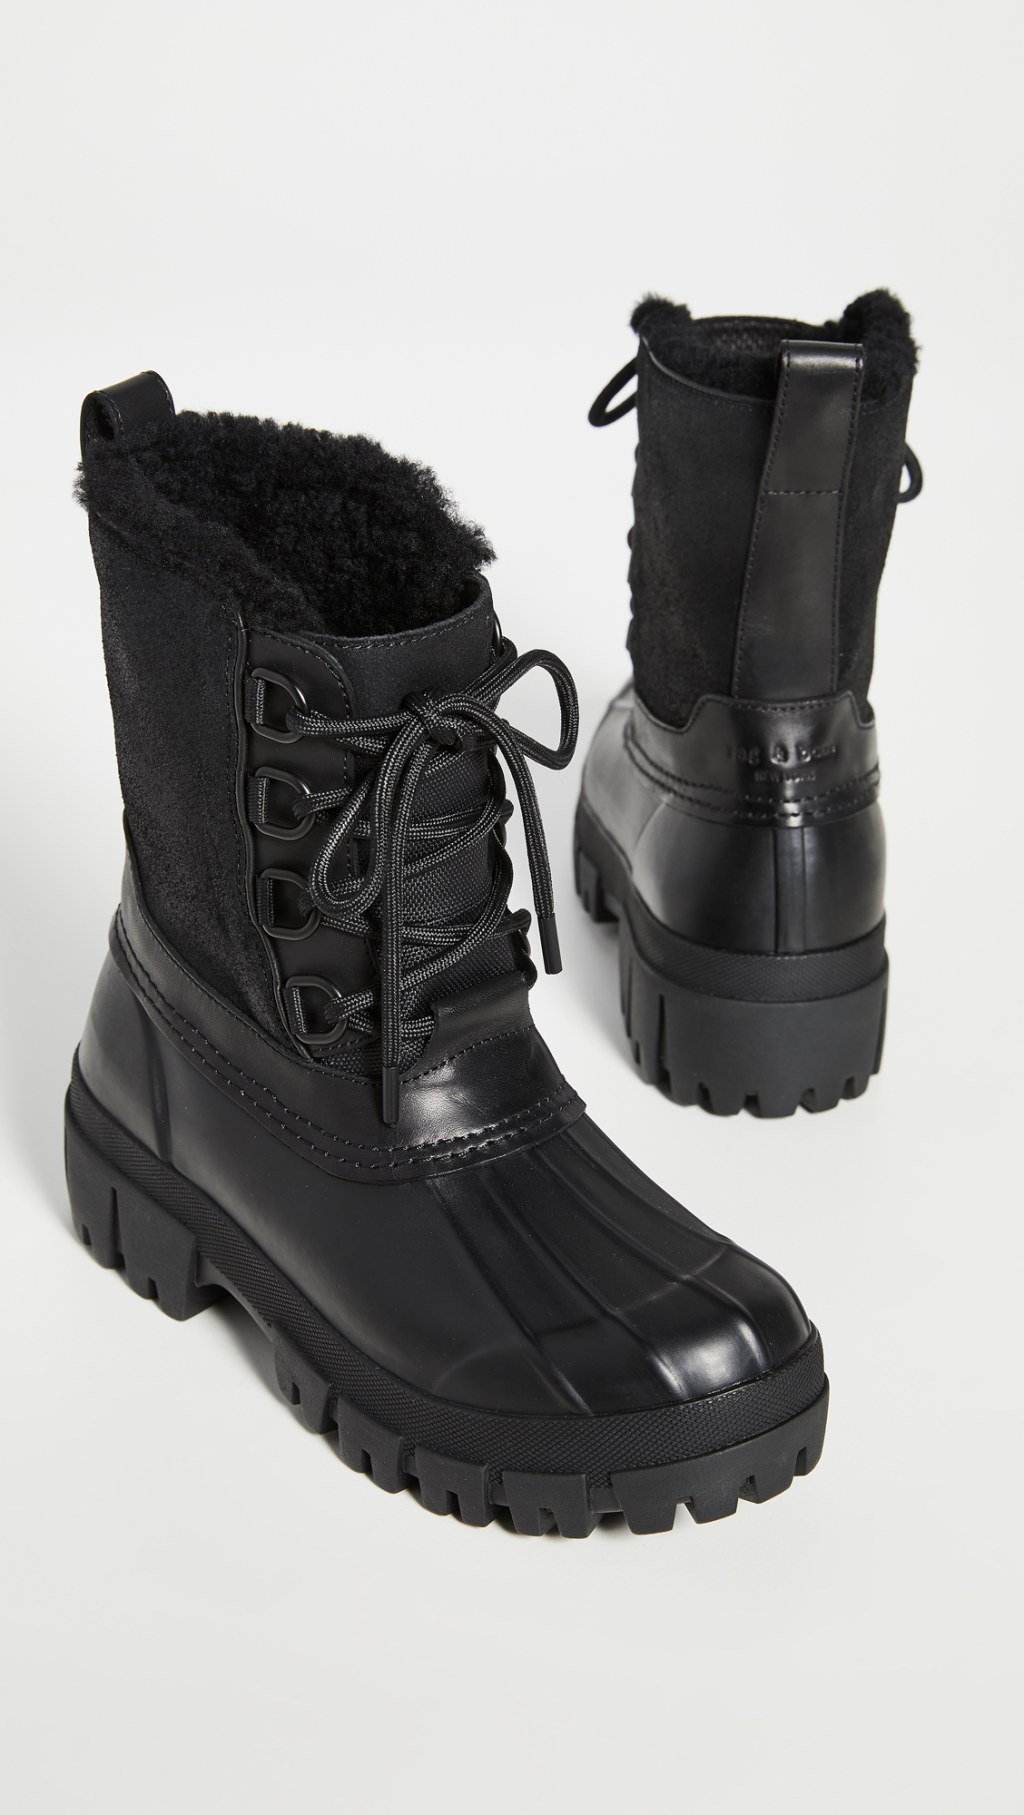 Picture of: Rb Winter Boots